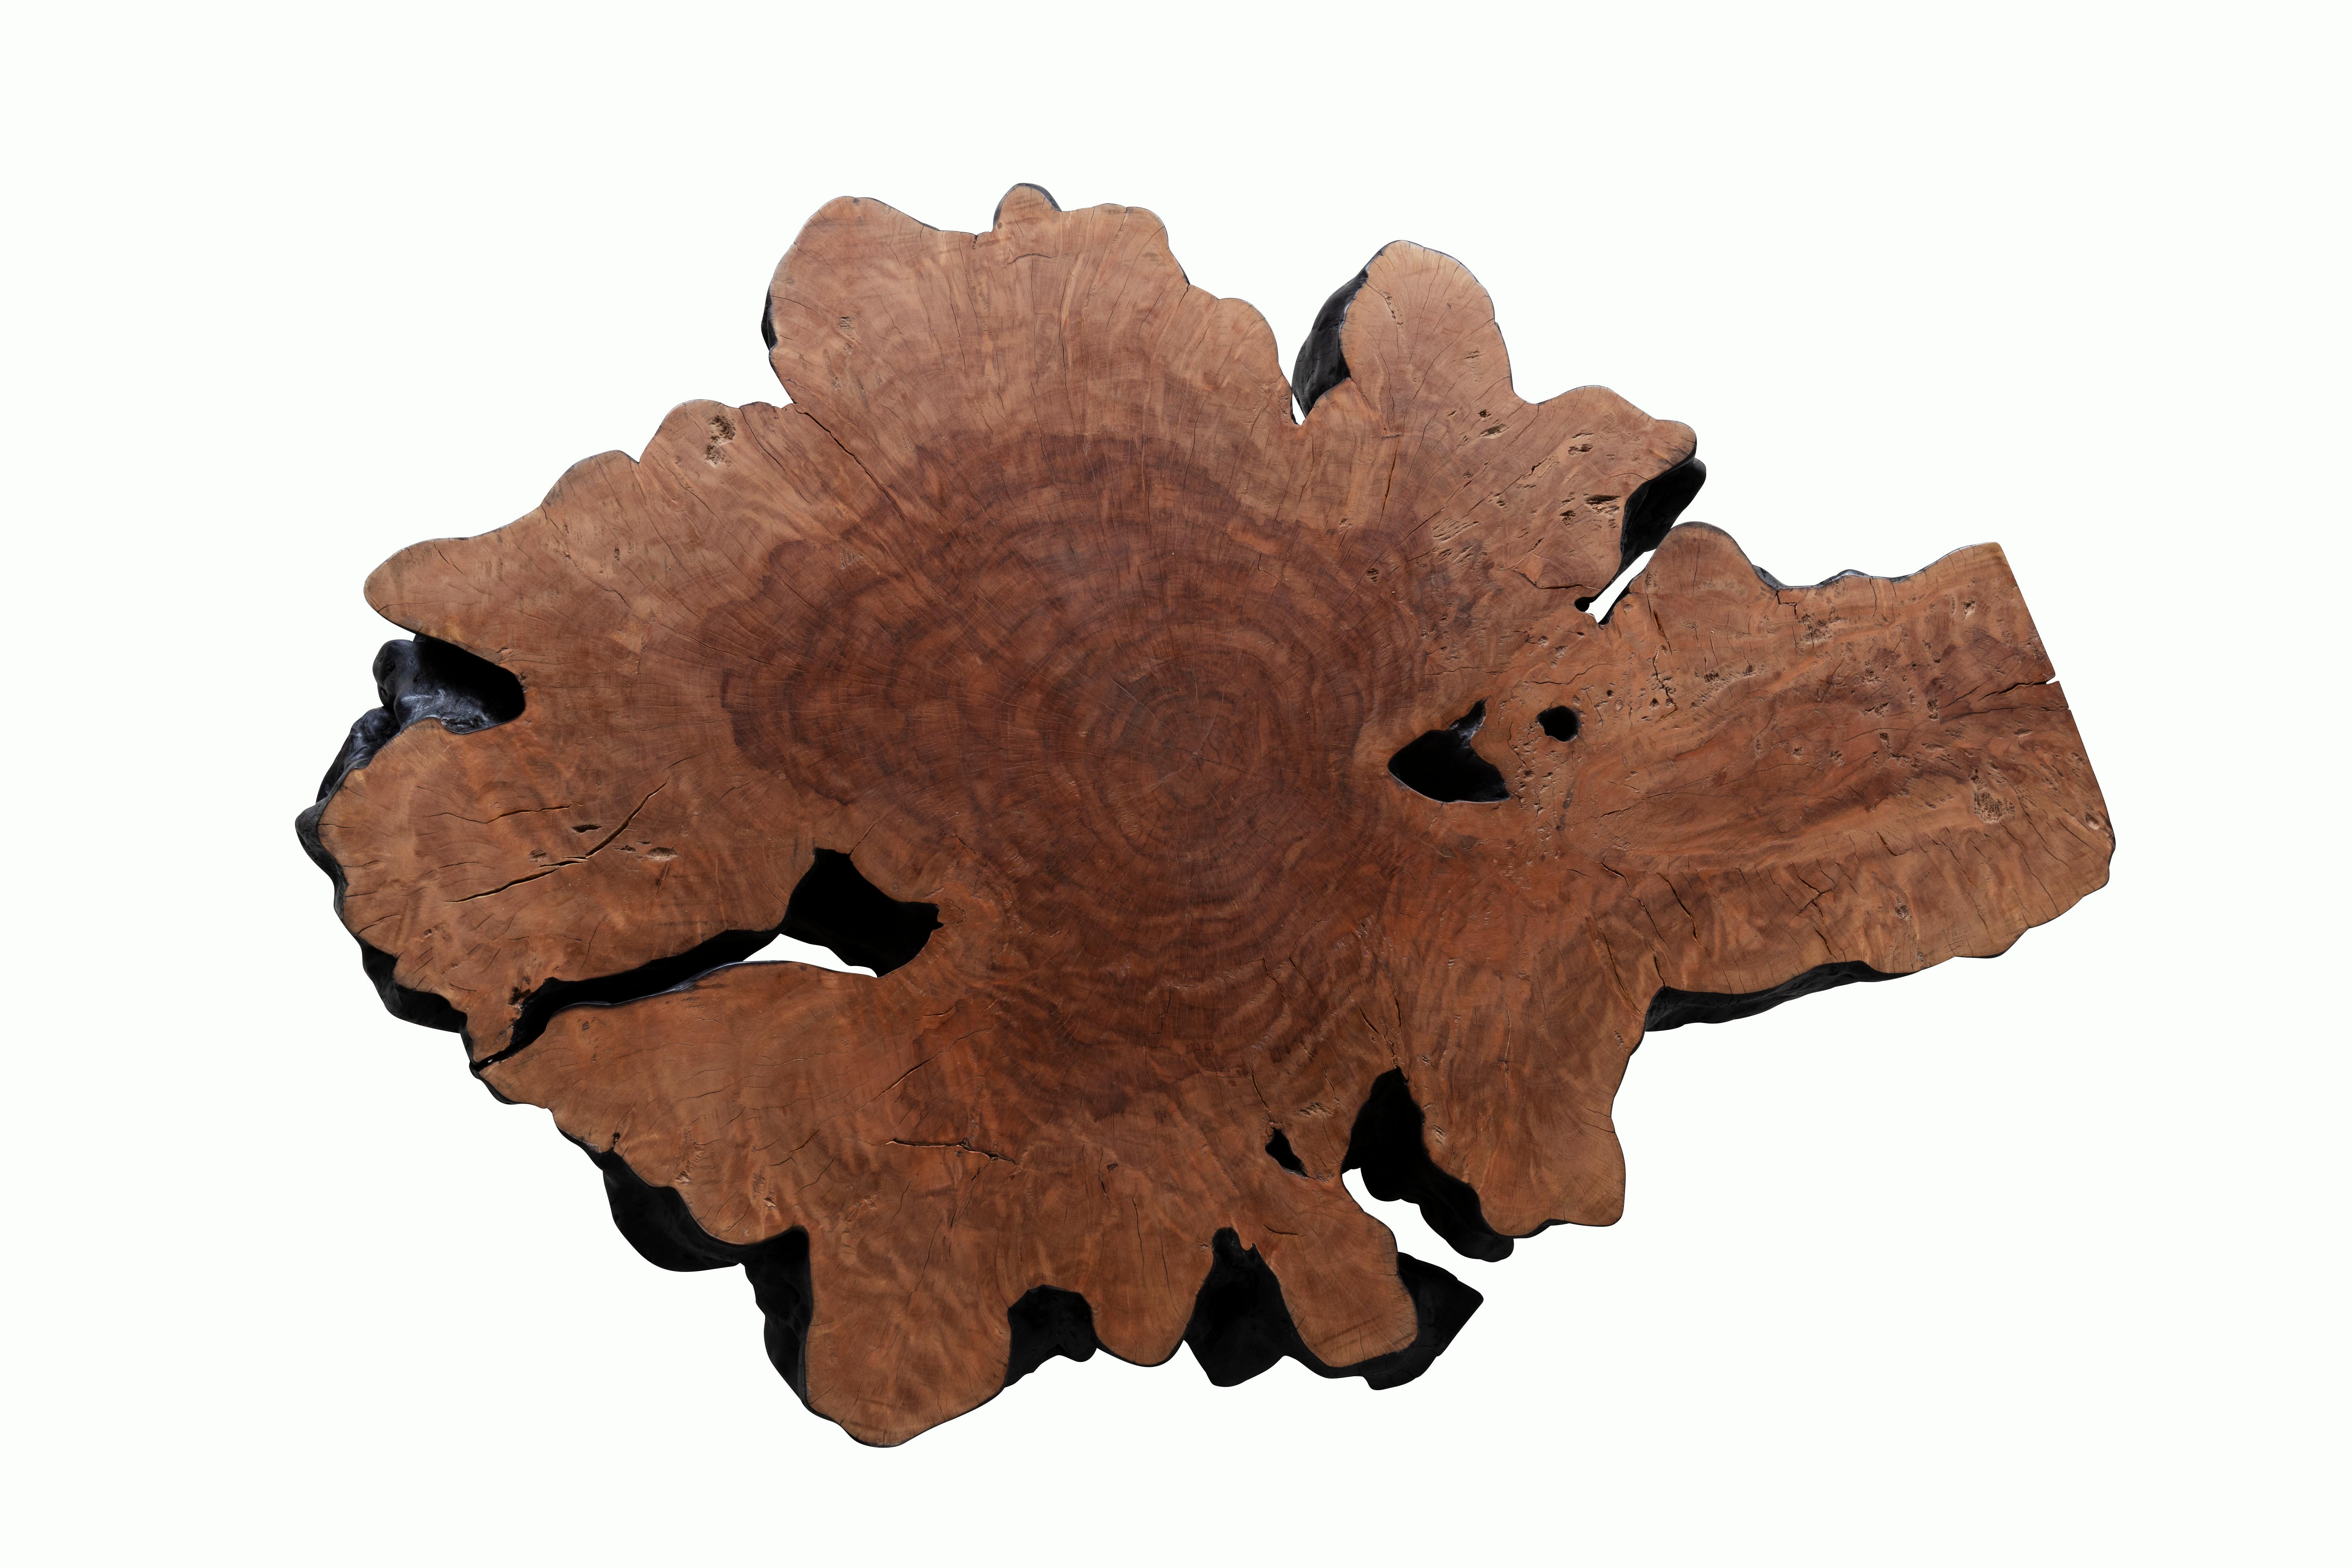 This coffee table is built from one single piece of lychee hardwood. The top is flattened, sanded, and then stained to compliment the wood's naturally rich texture and rustic patterns. The sides are kept in their natural organic shape and then